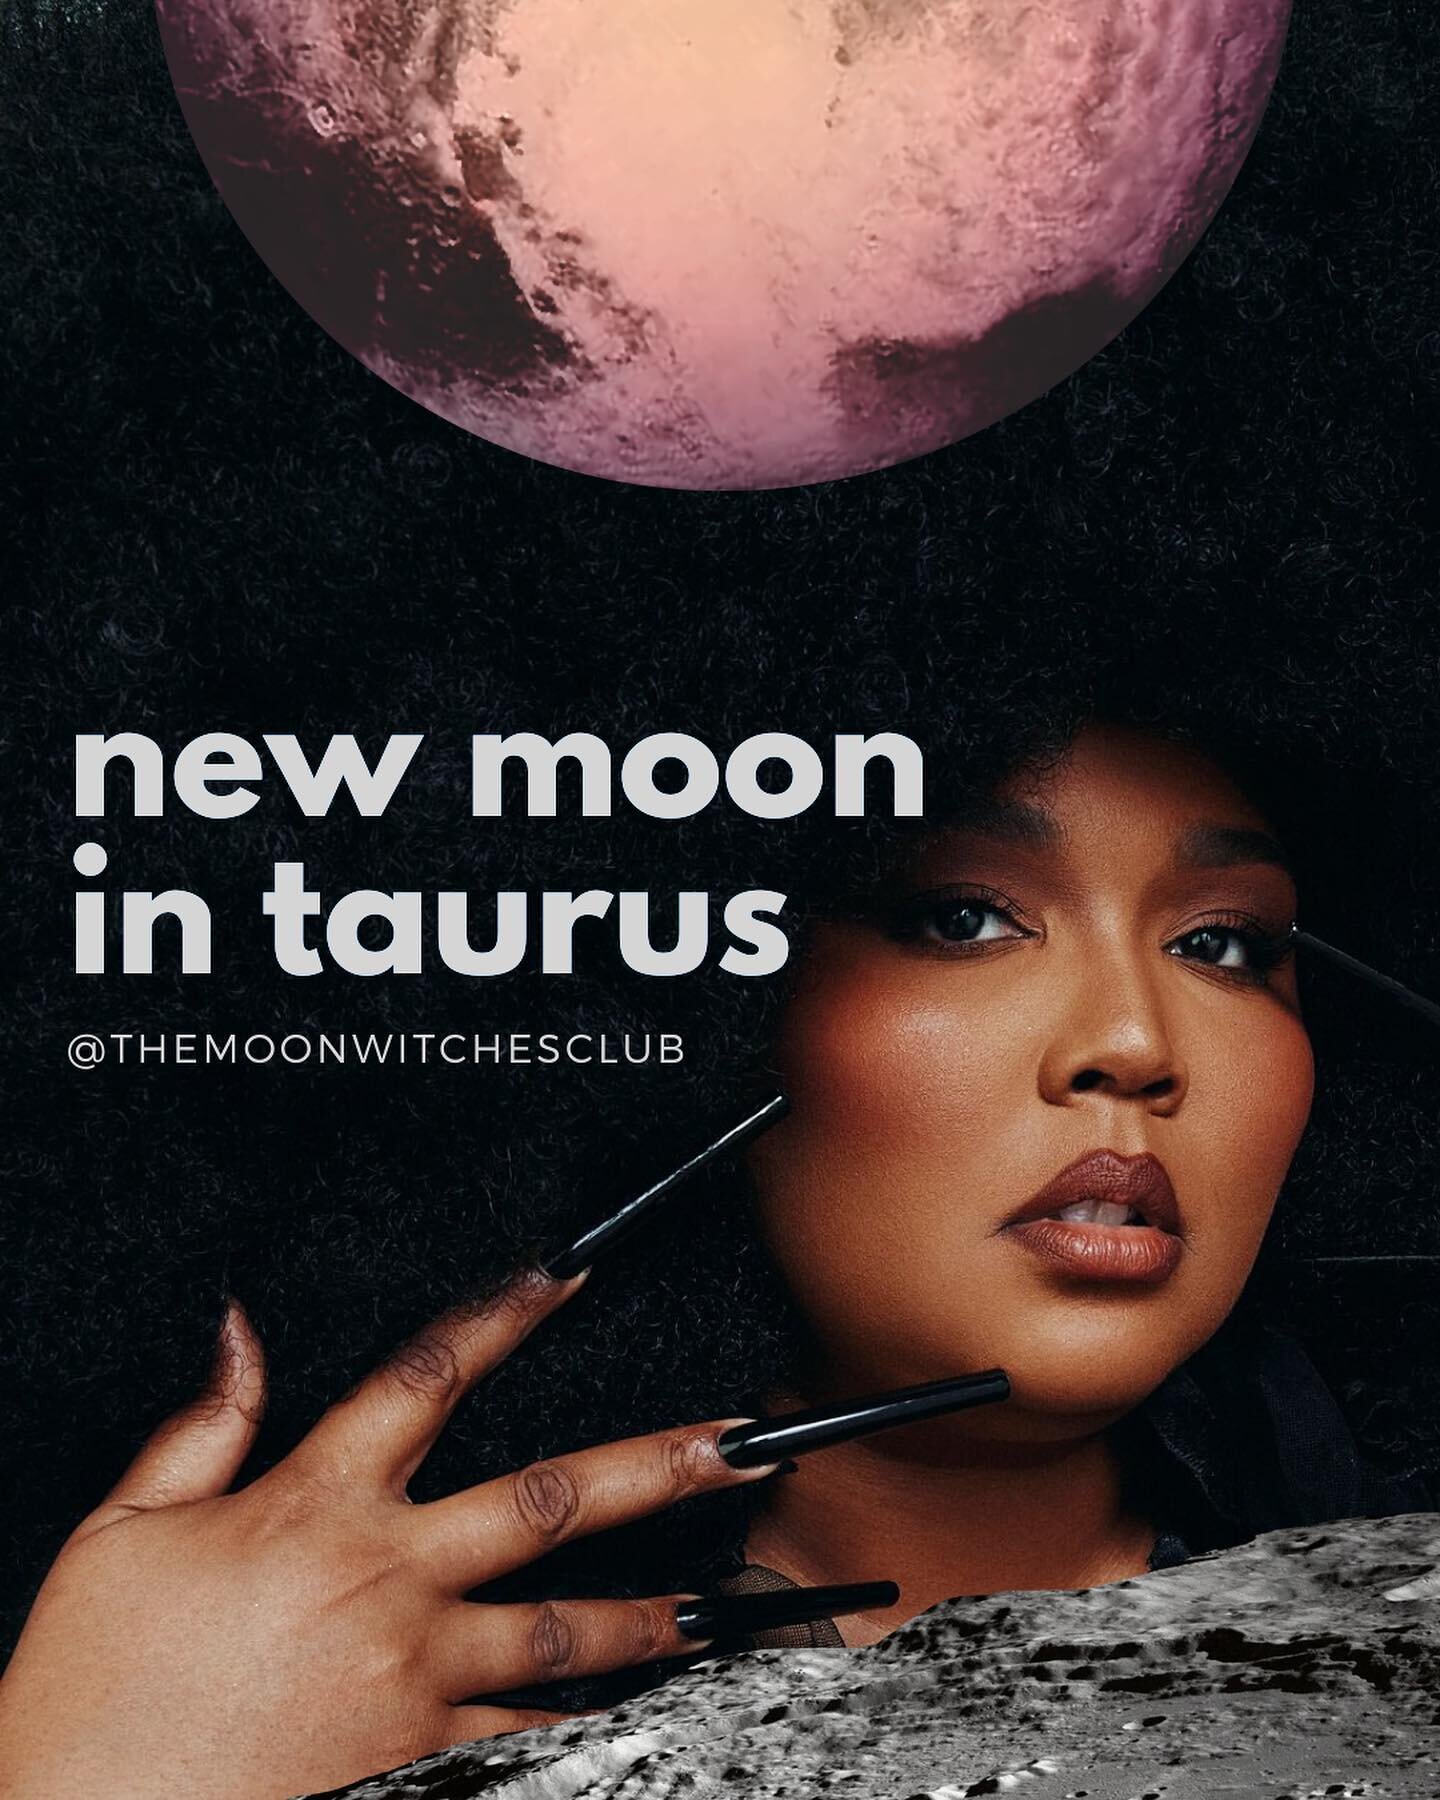 NEW MOON @ 28' Taurus
Friday 19th May, 15:53 GMT

This is THE new moon for manifesting long term abundance and stability. Mercury is direct, Jupiter has just entered Taurus and will bring expansion, growth, abundance to an area of your life for a who